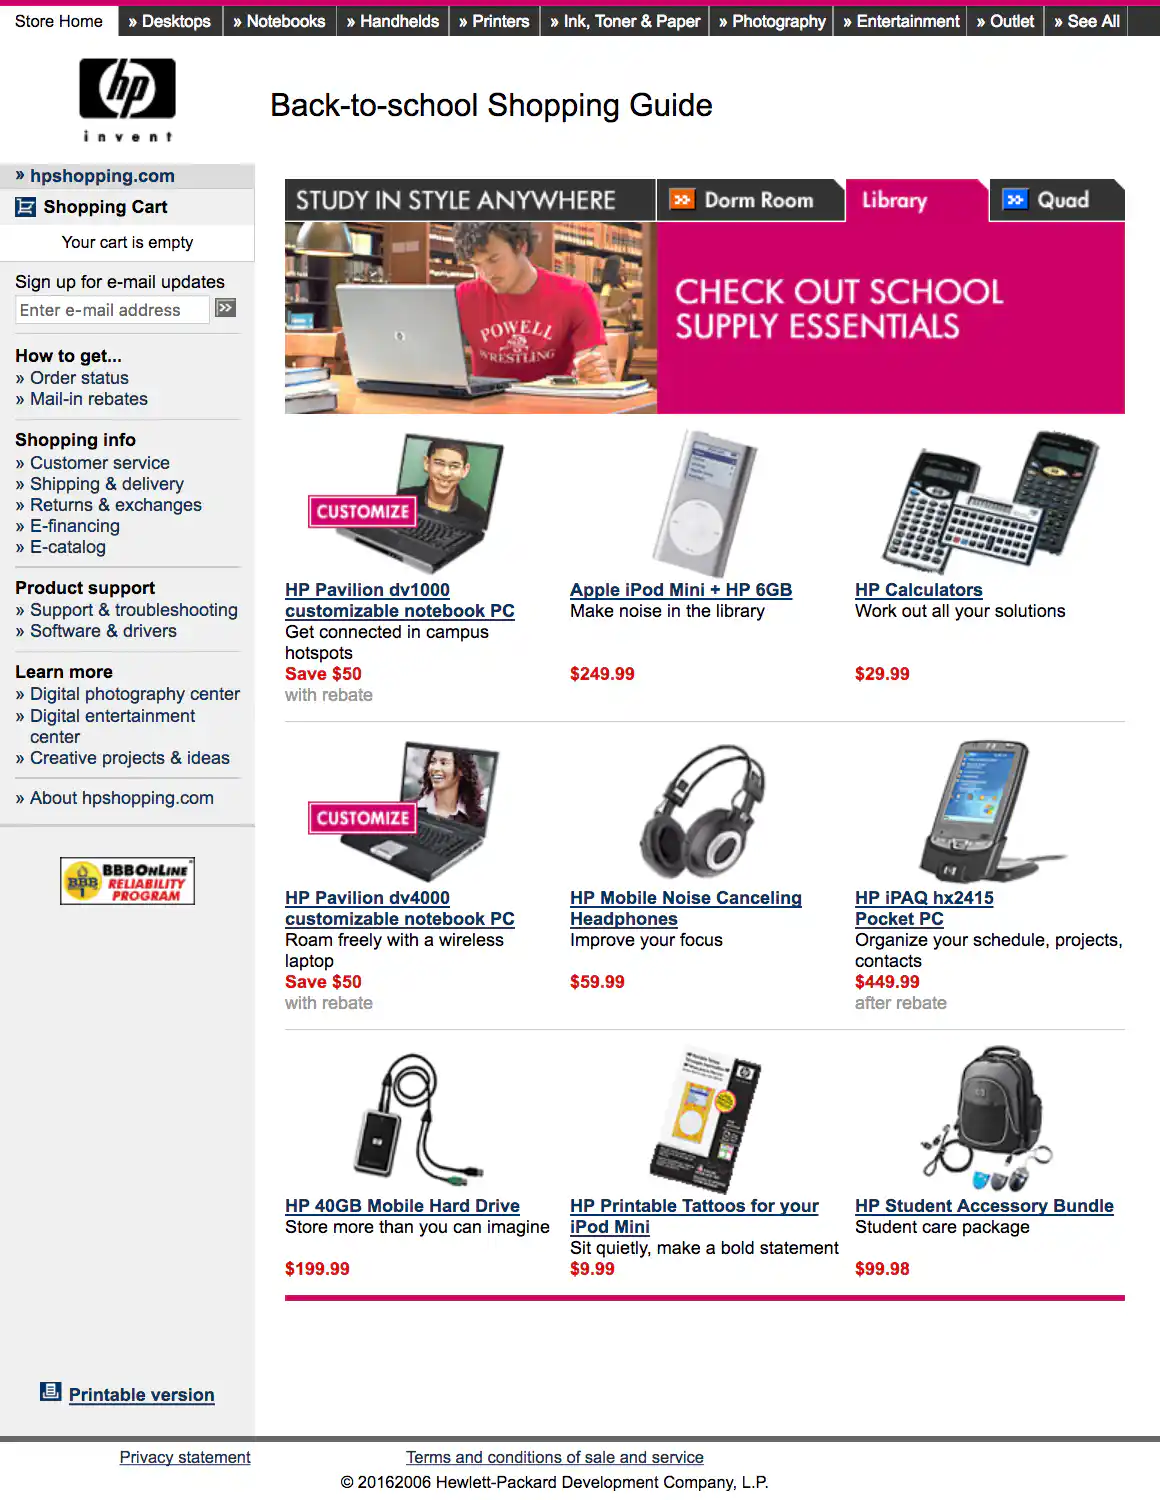 HPShopping.com Back-to-School Shopping Guide - Study Anywhere: Library